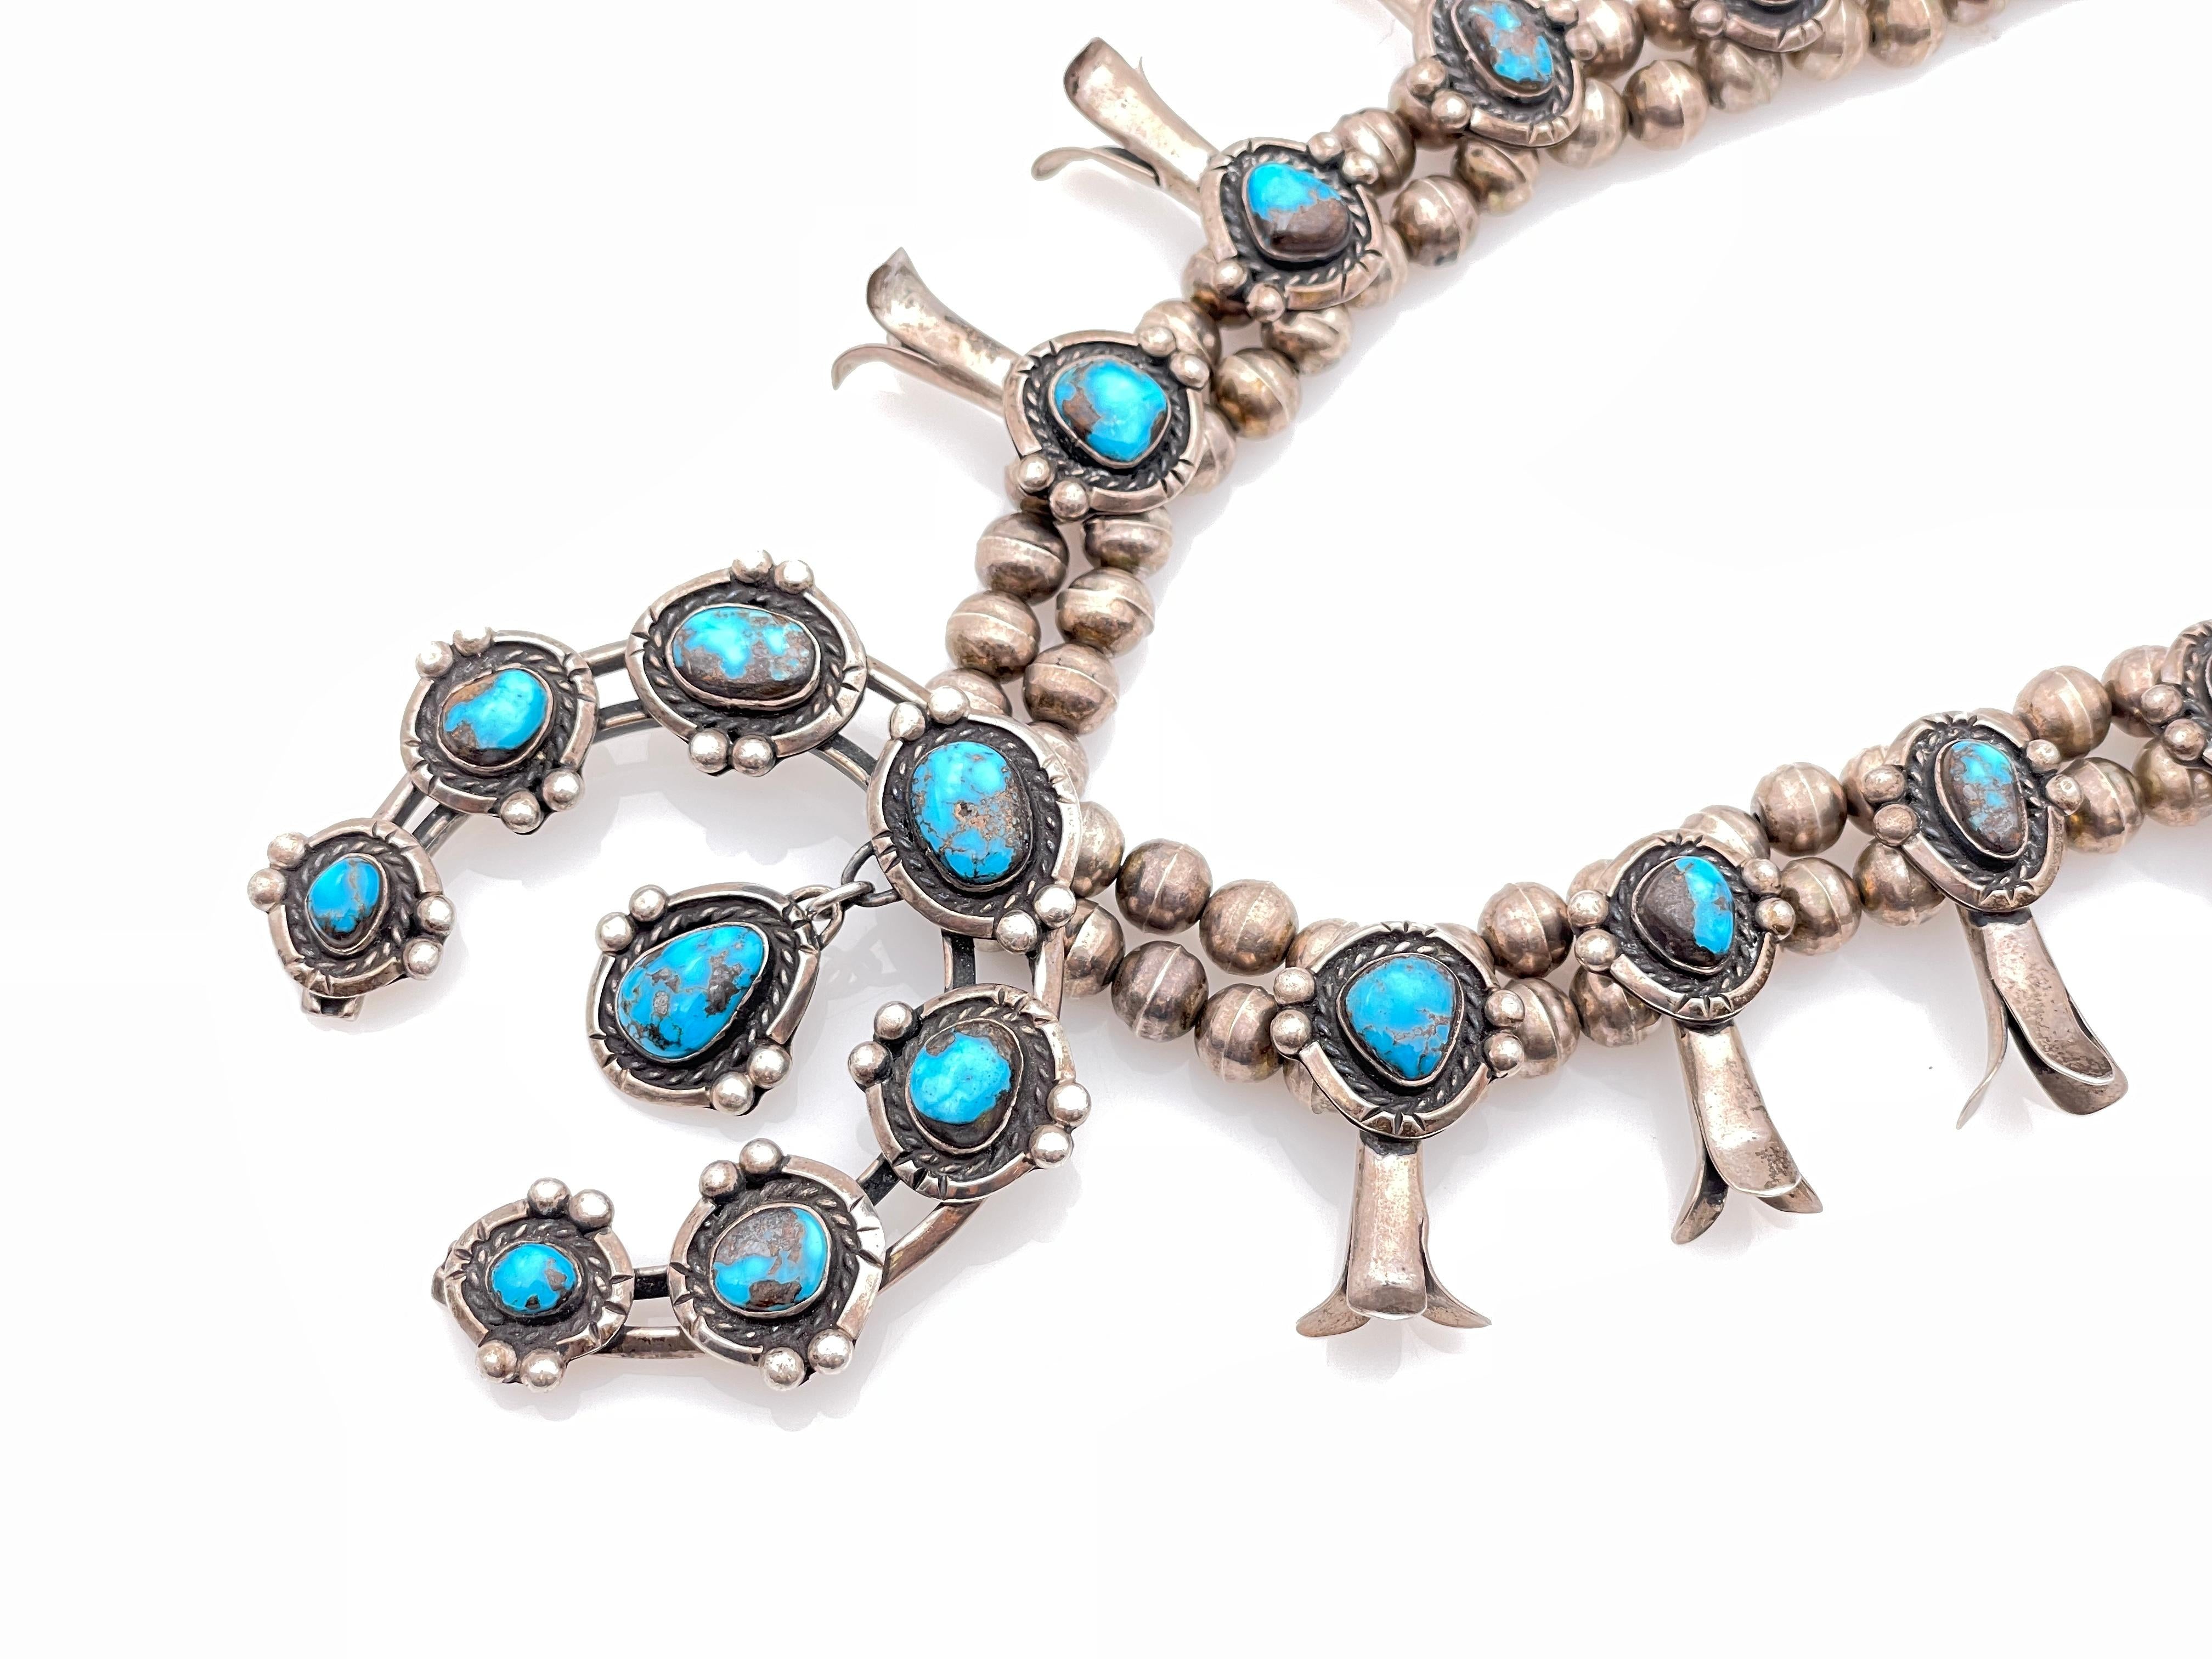 RARE! NATIVE AMERICAN STERLING SILVER BISBEE TURQUOISE SQUASH BLOSSOM NECKLACE